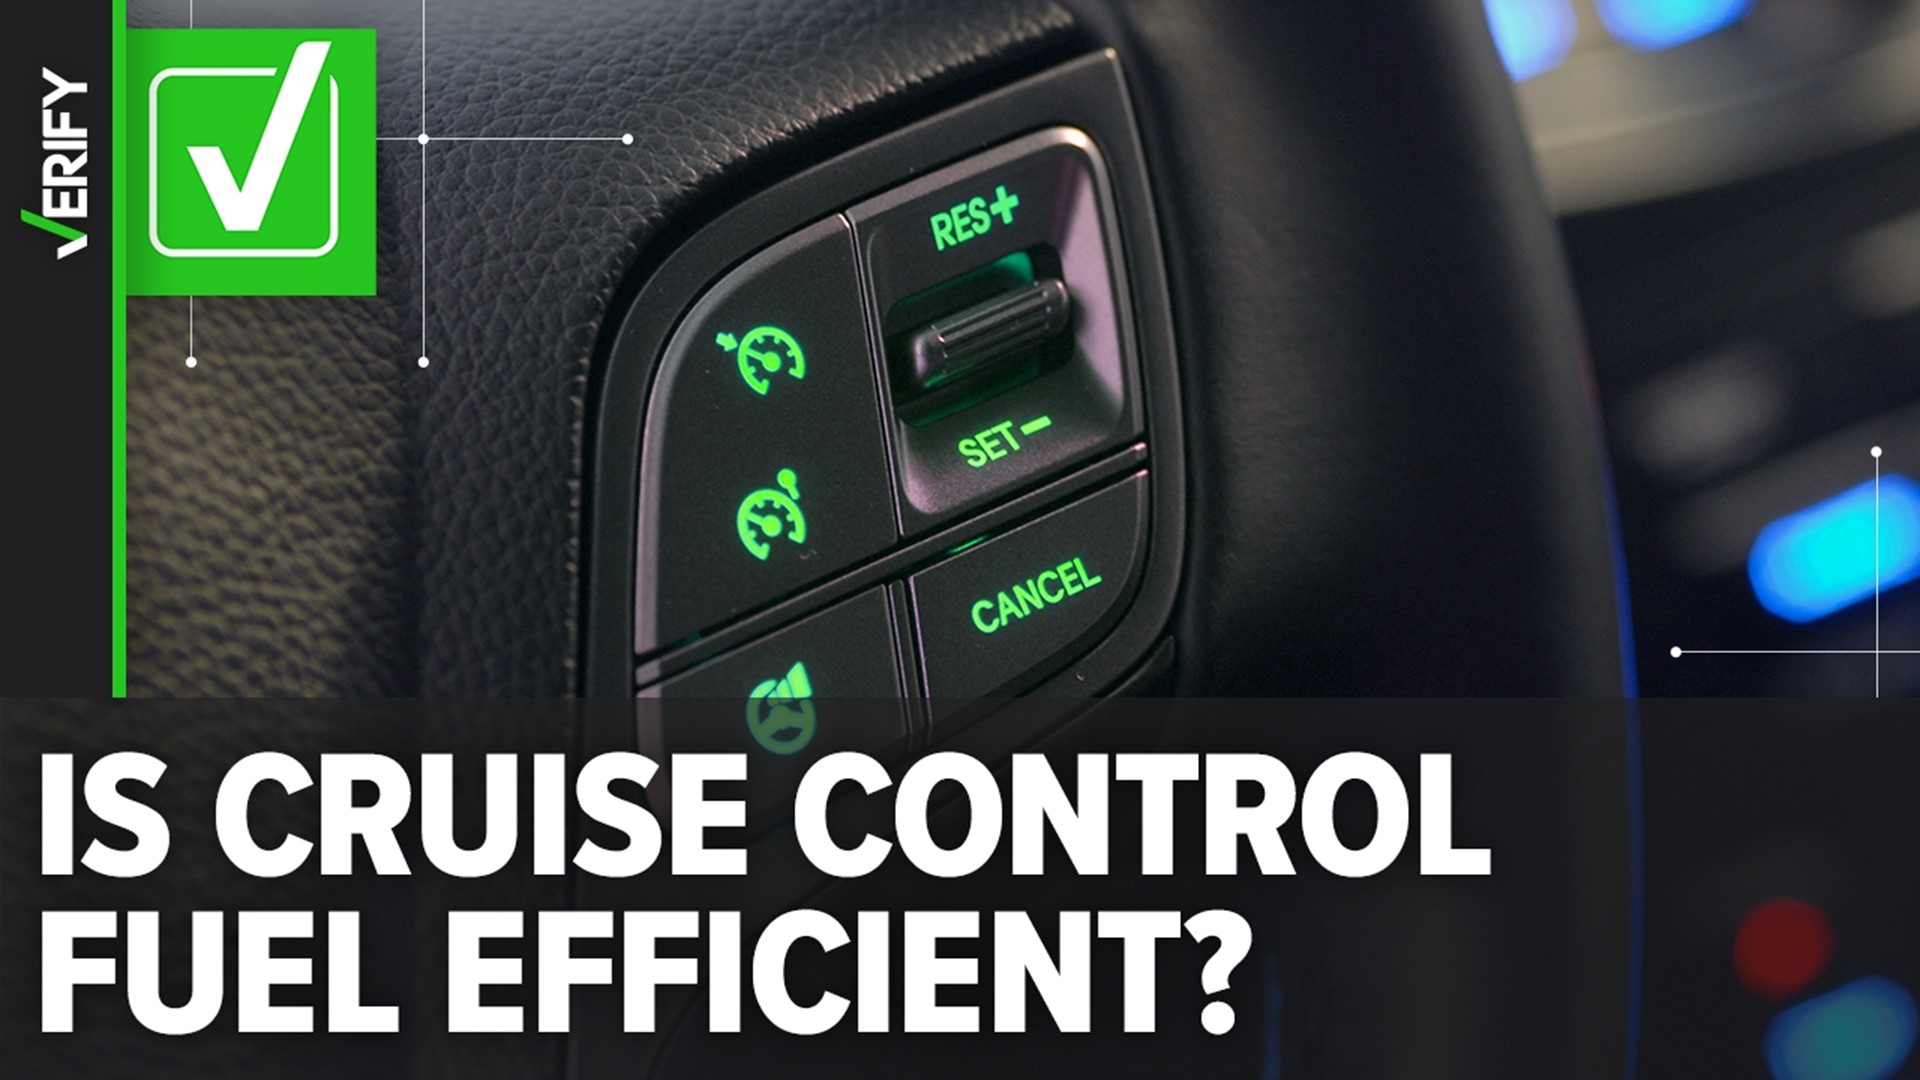 Driving at inconsistent speeds burn more gas, which cruise control helps prevent. We VERIFY what you need to know about cruise control and fuel.